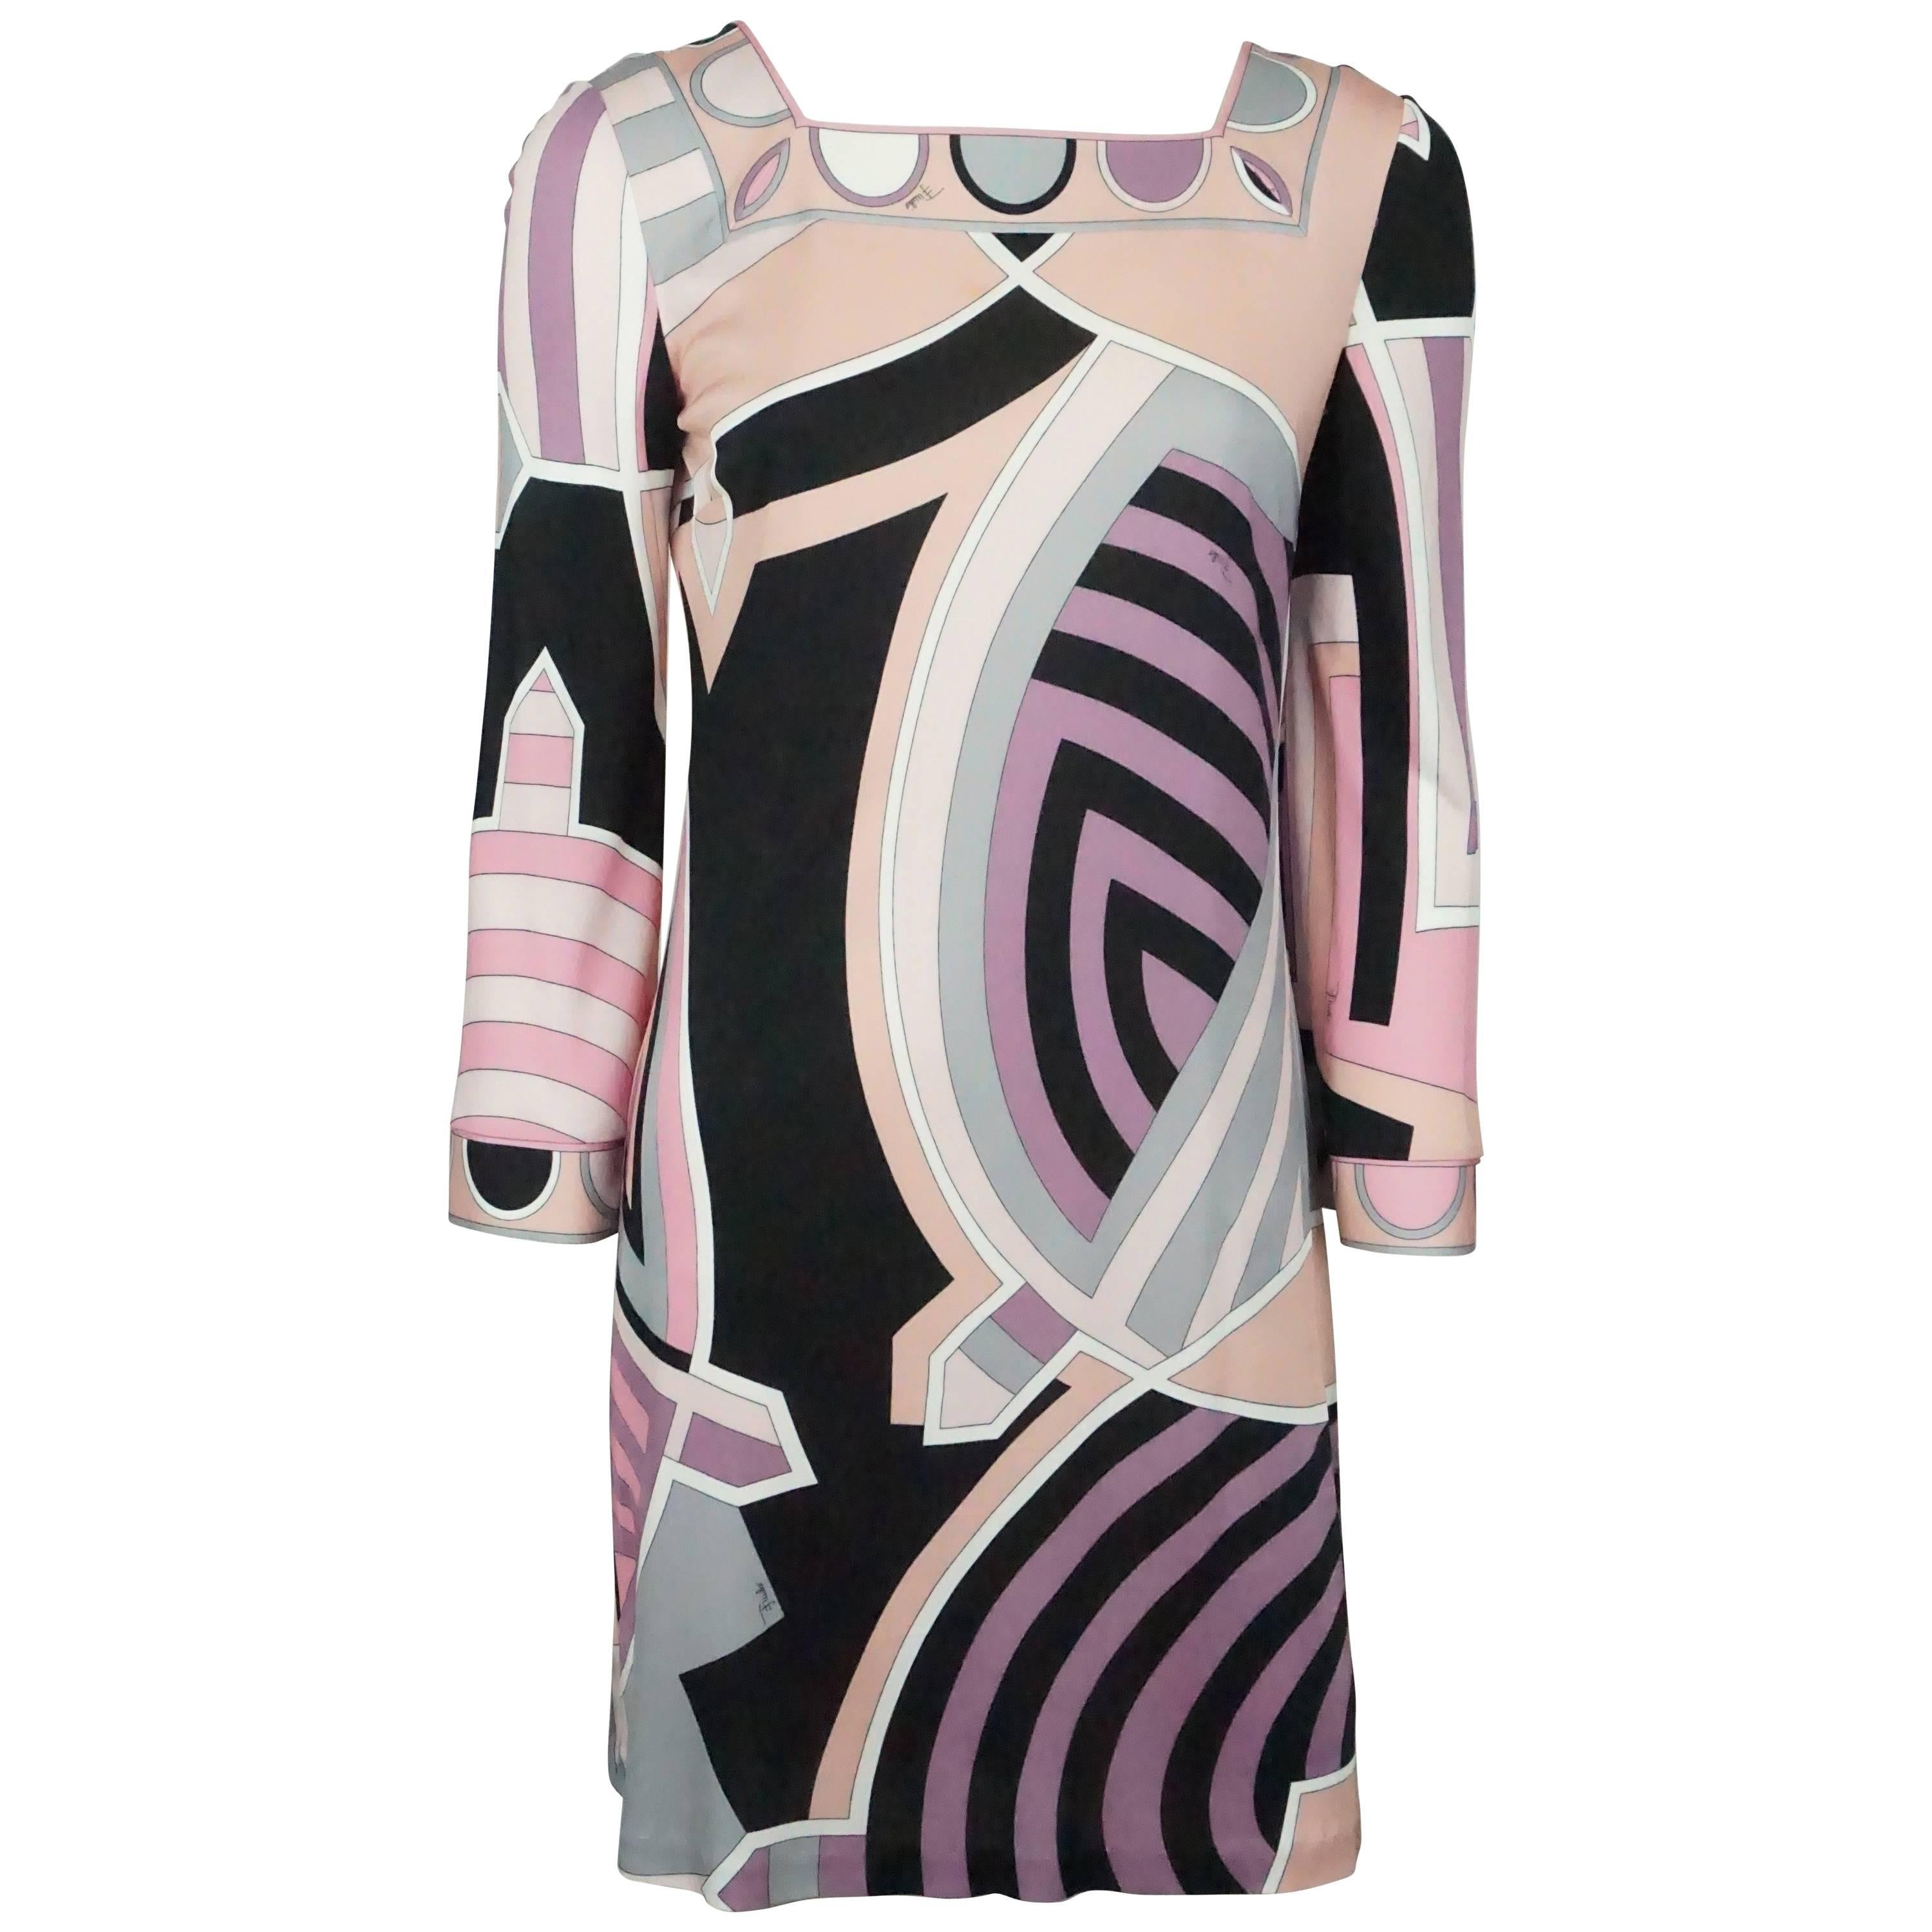 Emilio Pucci Pink, Black, and Earthtones Printed L/S Dress - 6 For Sale